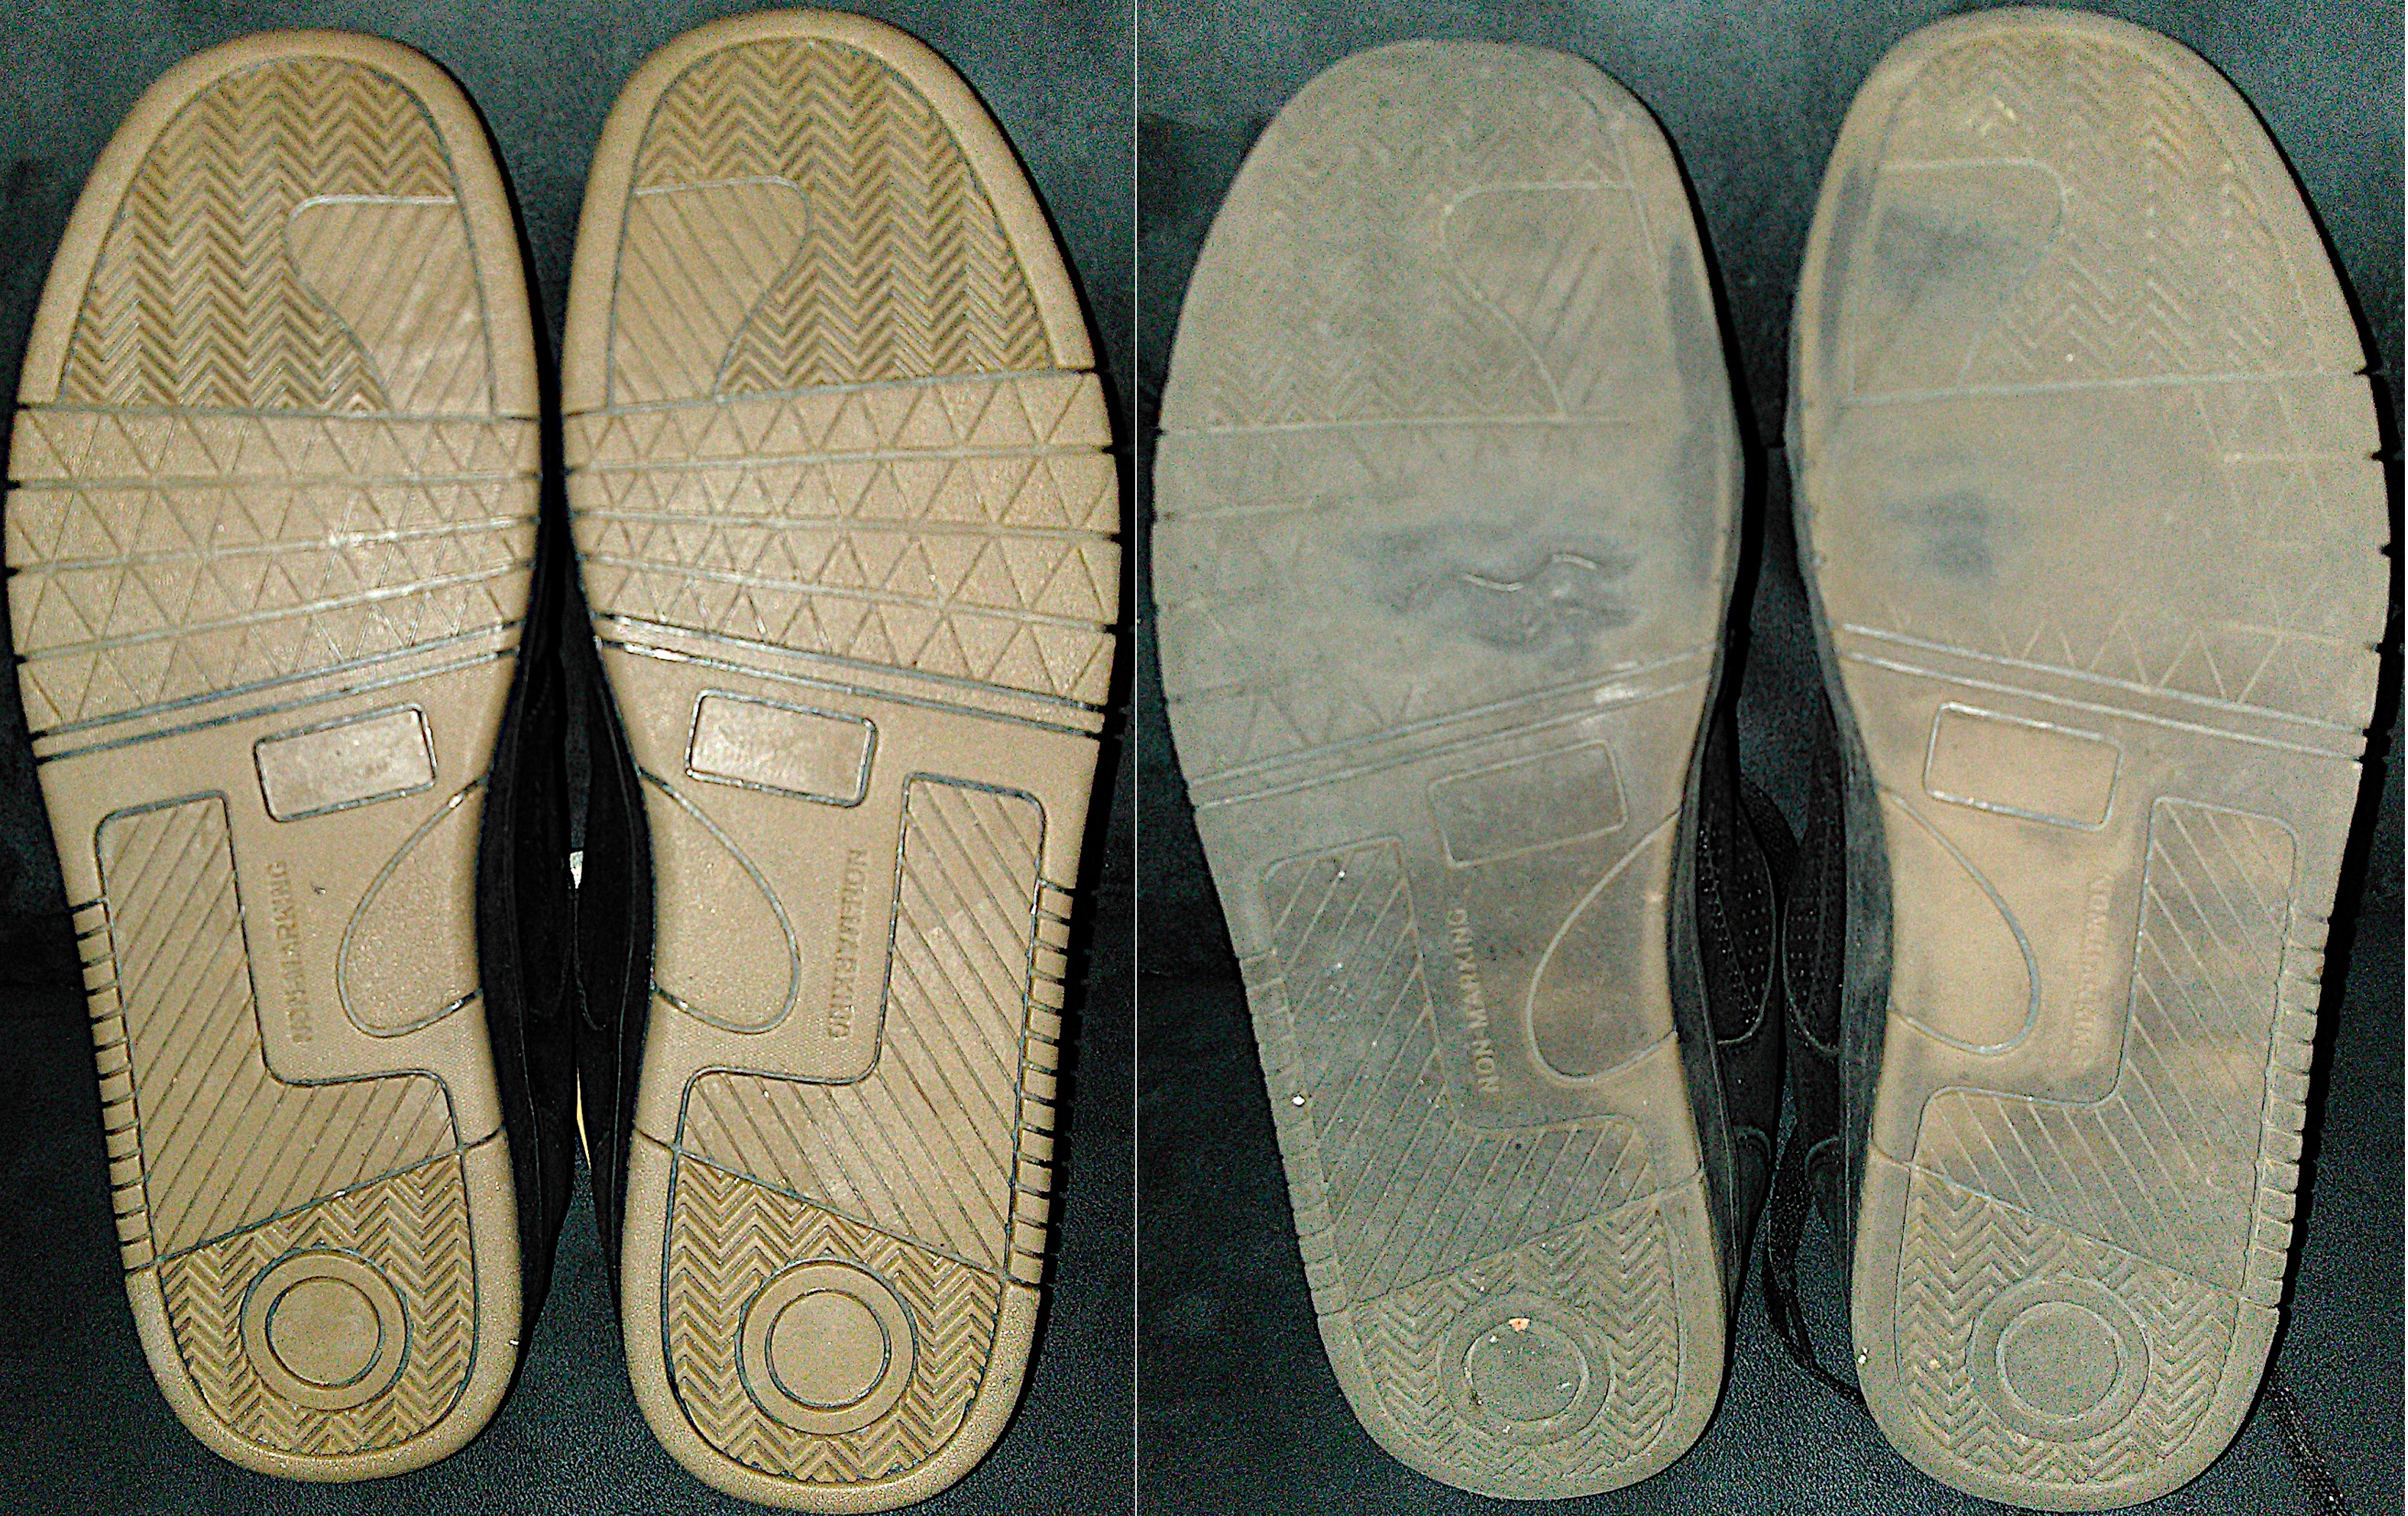 Comparing the wear of the Harsh Arabica skate shoe soles when new vs. after 1 year of steady longboarding